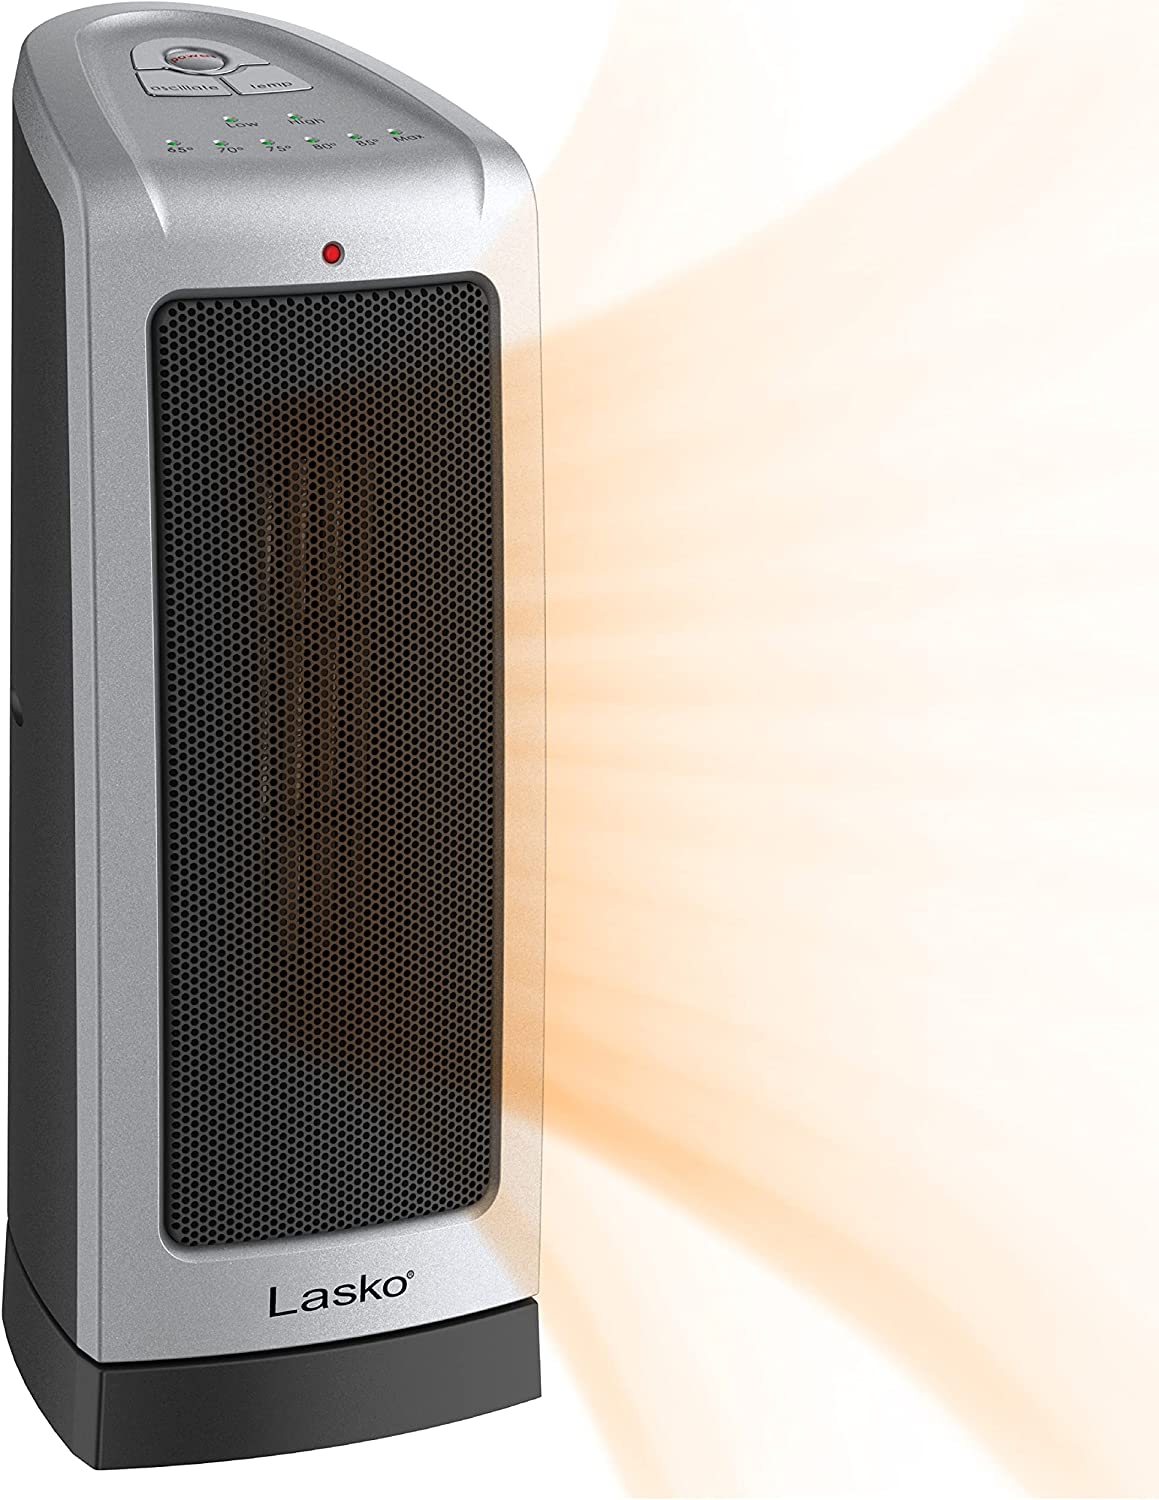 Lasko Oscillating Ceramic Tower Space Heater for Home with Adjustable Thermostat, 2-Speeds, 16 Inches, Silver, 1500W